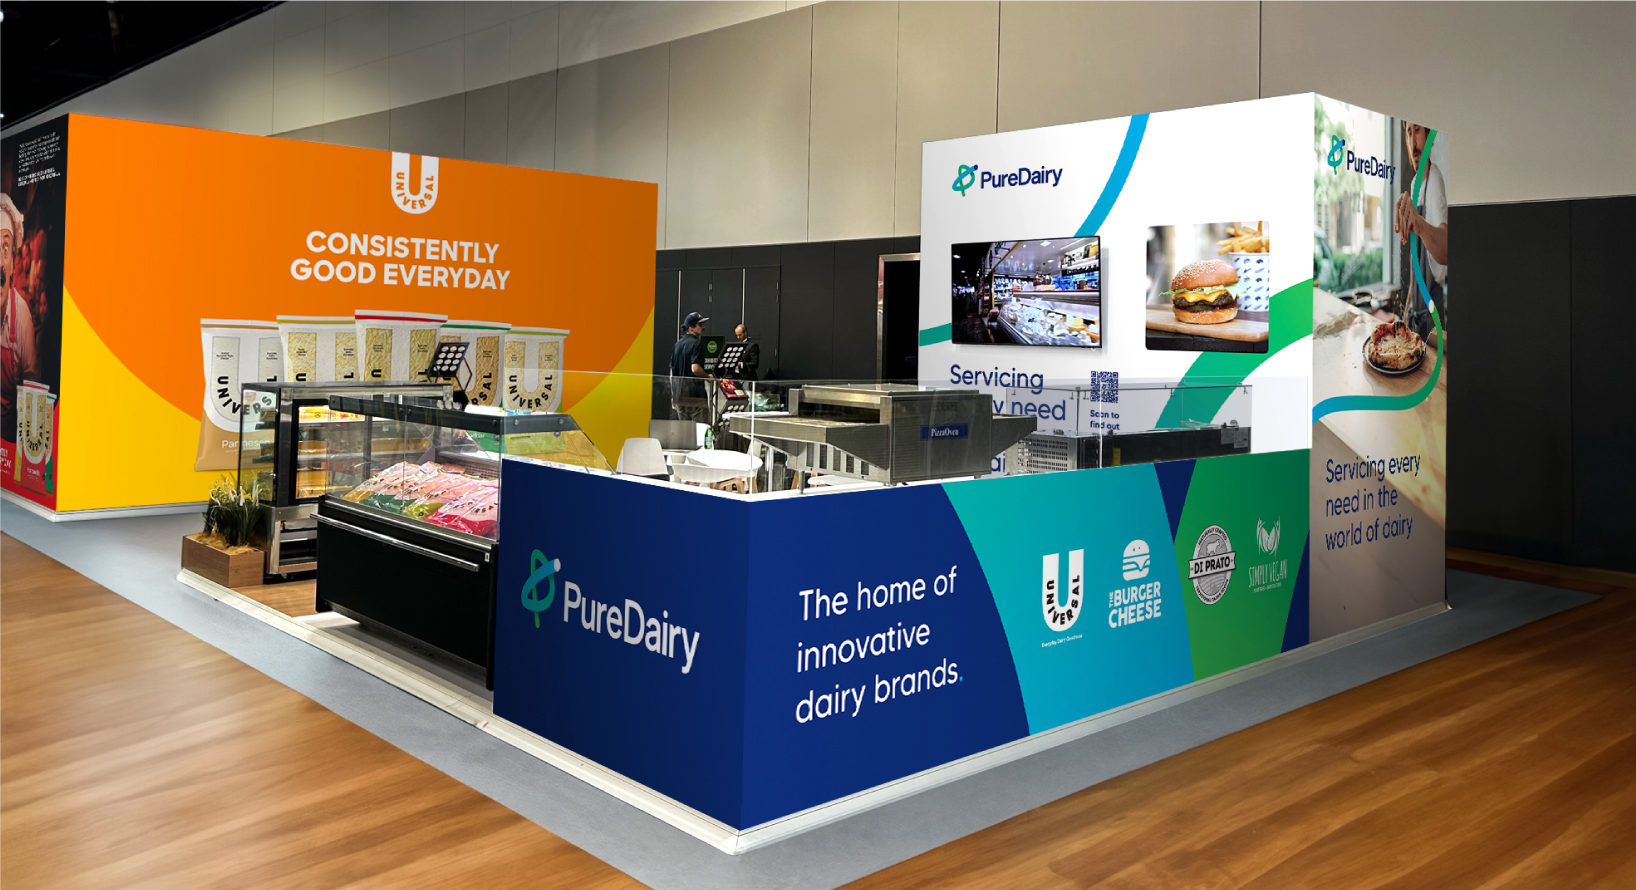 Pure Dairy trade show stand showcasing the brand